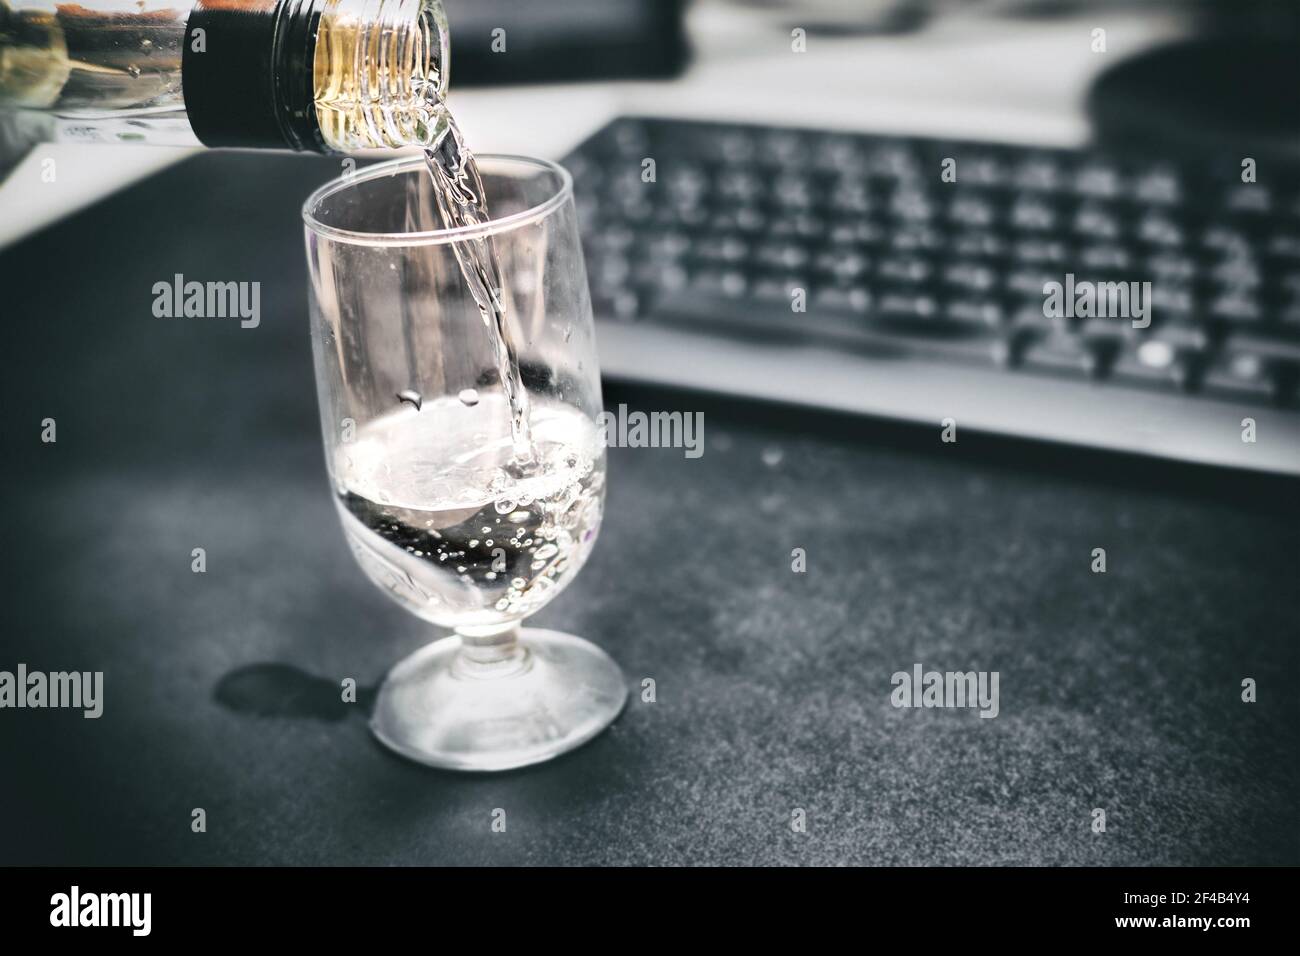 Drunk at work. Pouring a glass of vodka. Defocused office desk and keyboard to show compromised vision and brain function. Concept for coping with wor Stock Photo